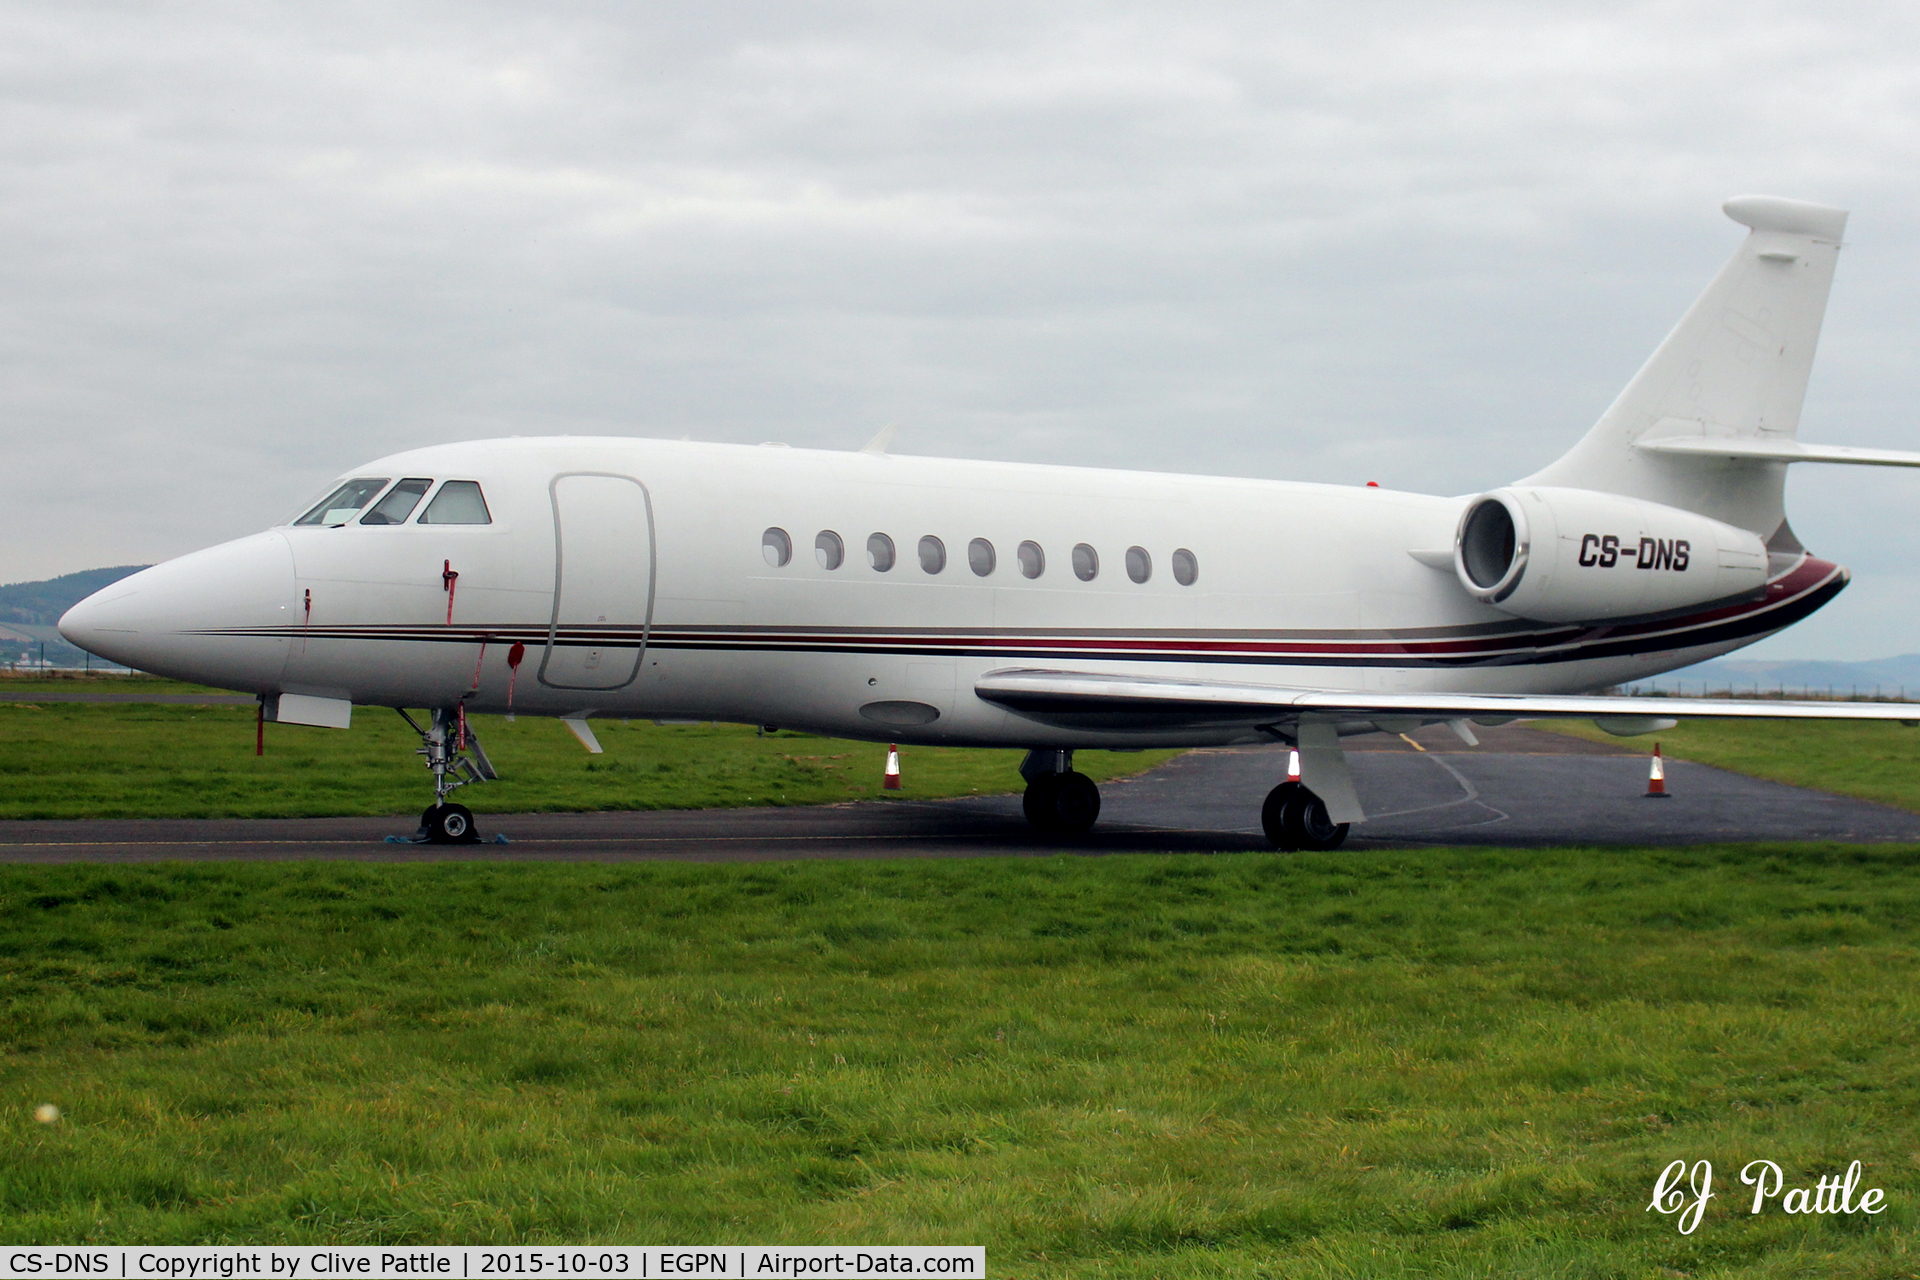 CS-DNS, 2001 Dassault Falcon 2000 C/N 139, A bizjet busy weekend at Dundee Riverside EGPN during the Dunhill Golf Championships at nearby St Andrews. CS-DNS parked on the north taxiway.